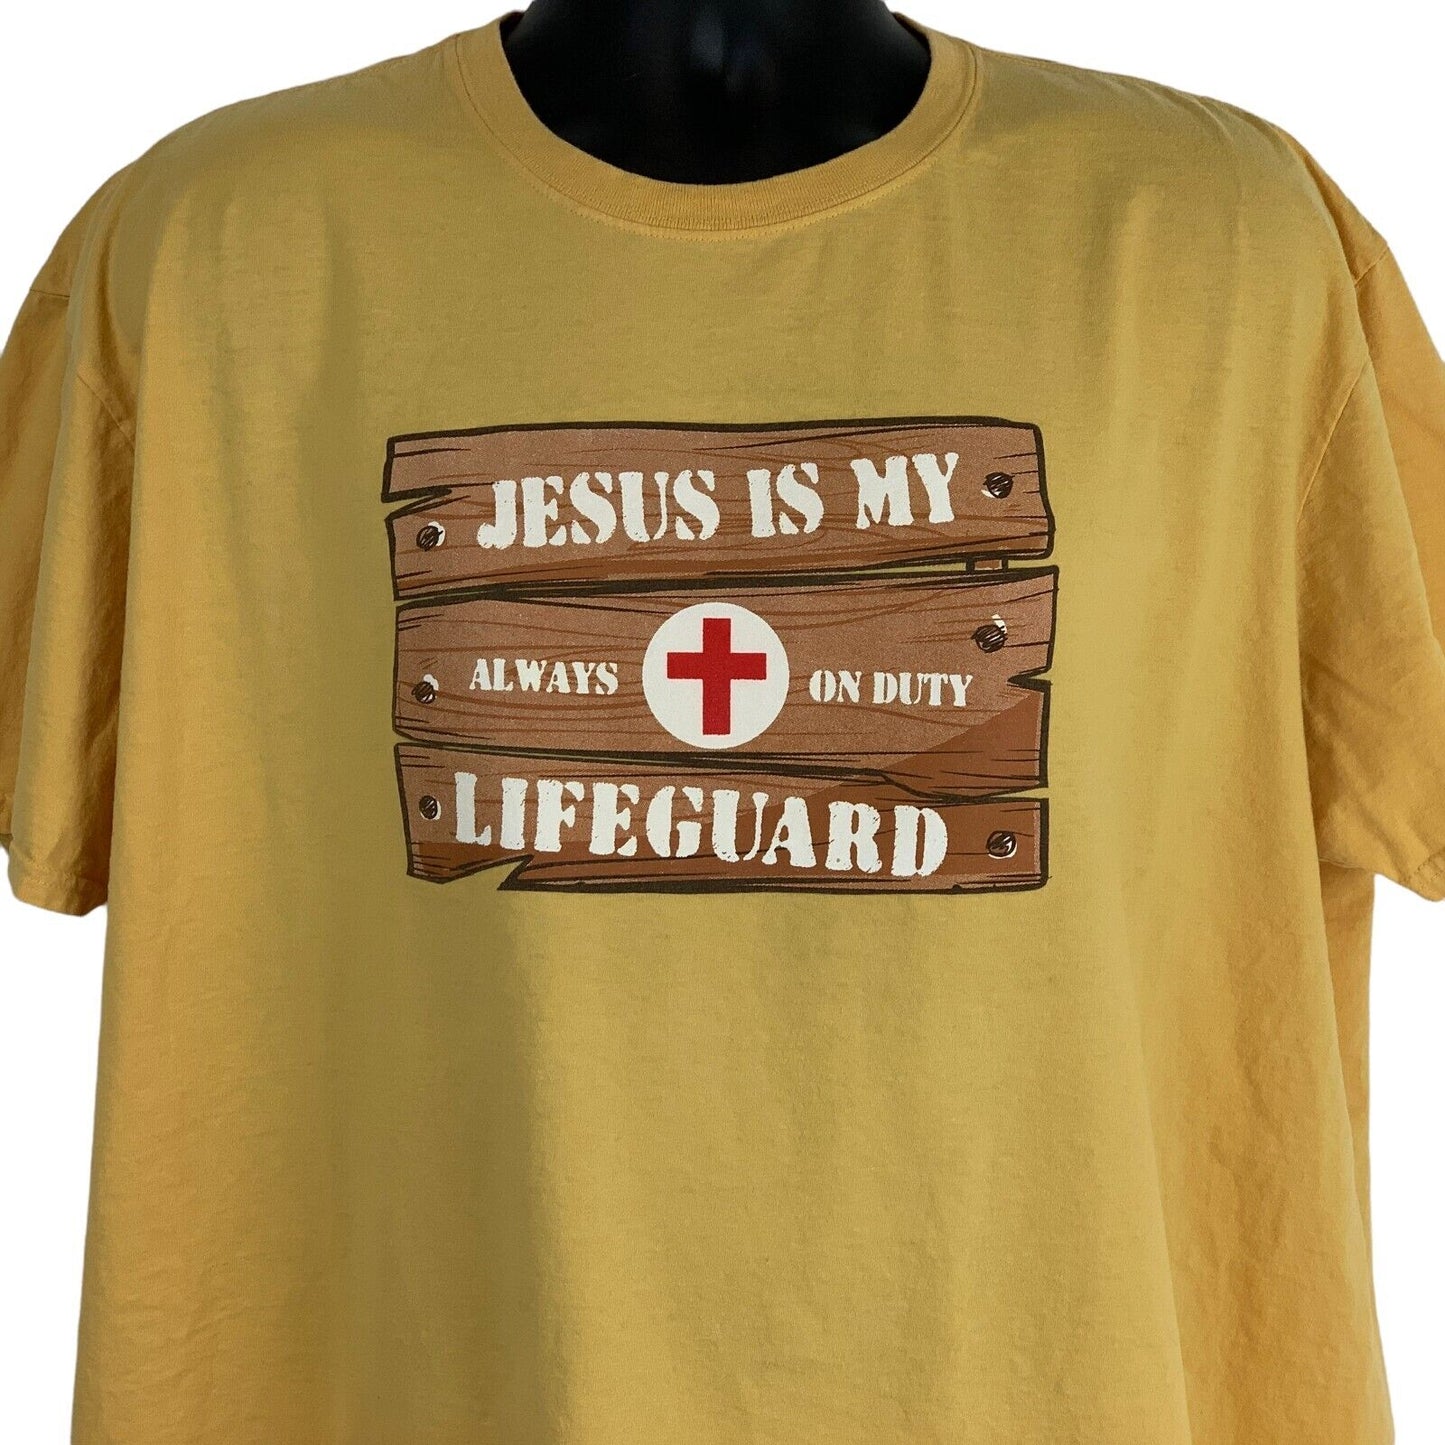 Jesus Is My Lifeguard T Shirt Christ Christian Religious Religion Swimming 2XL